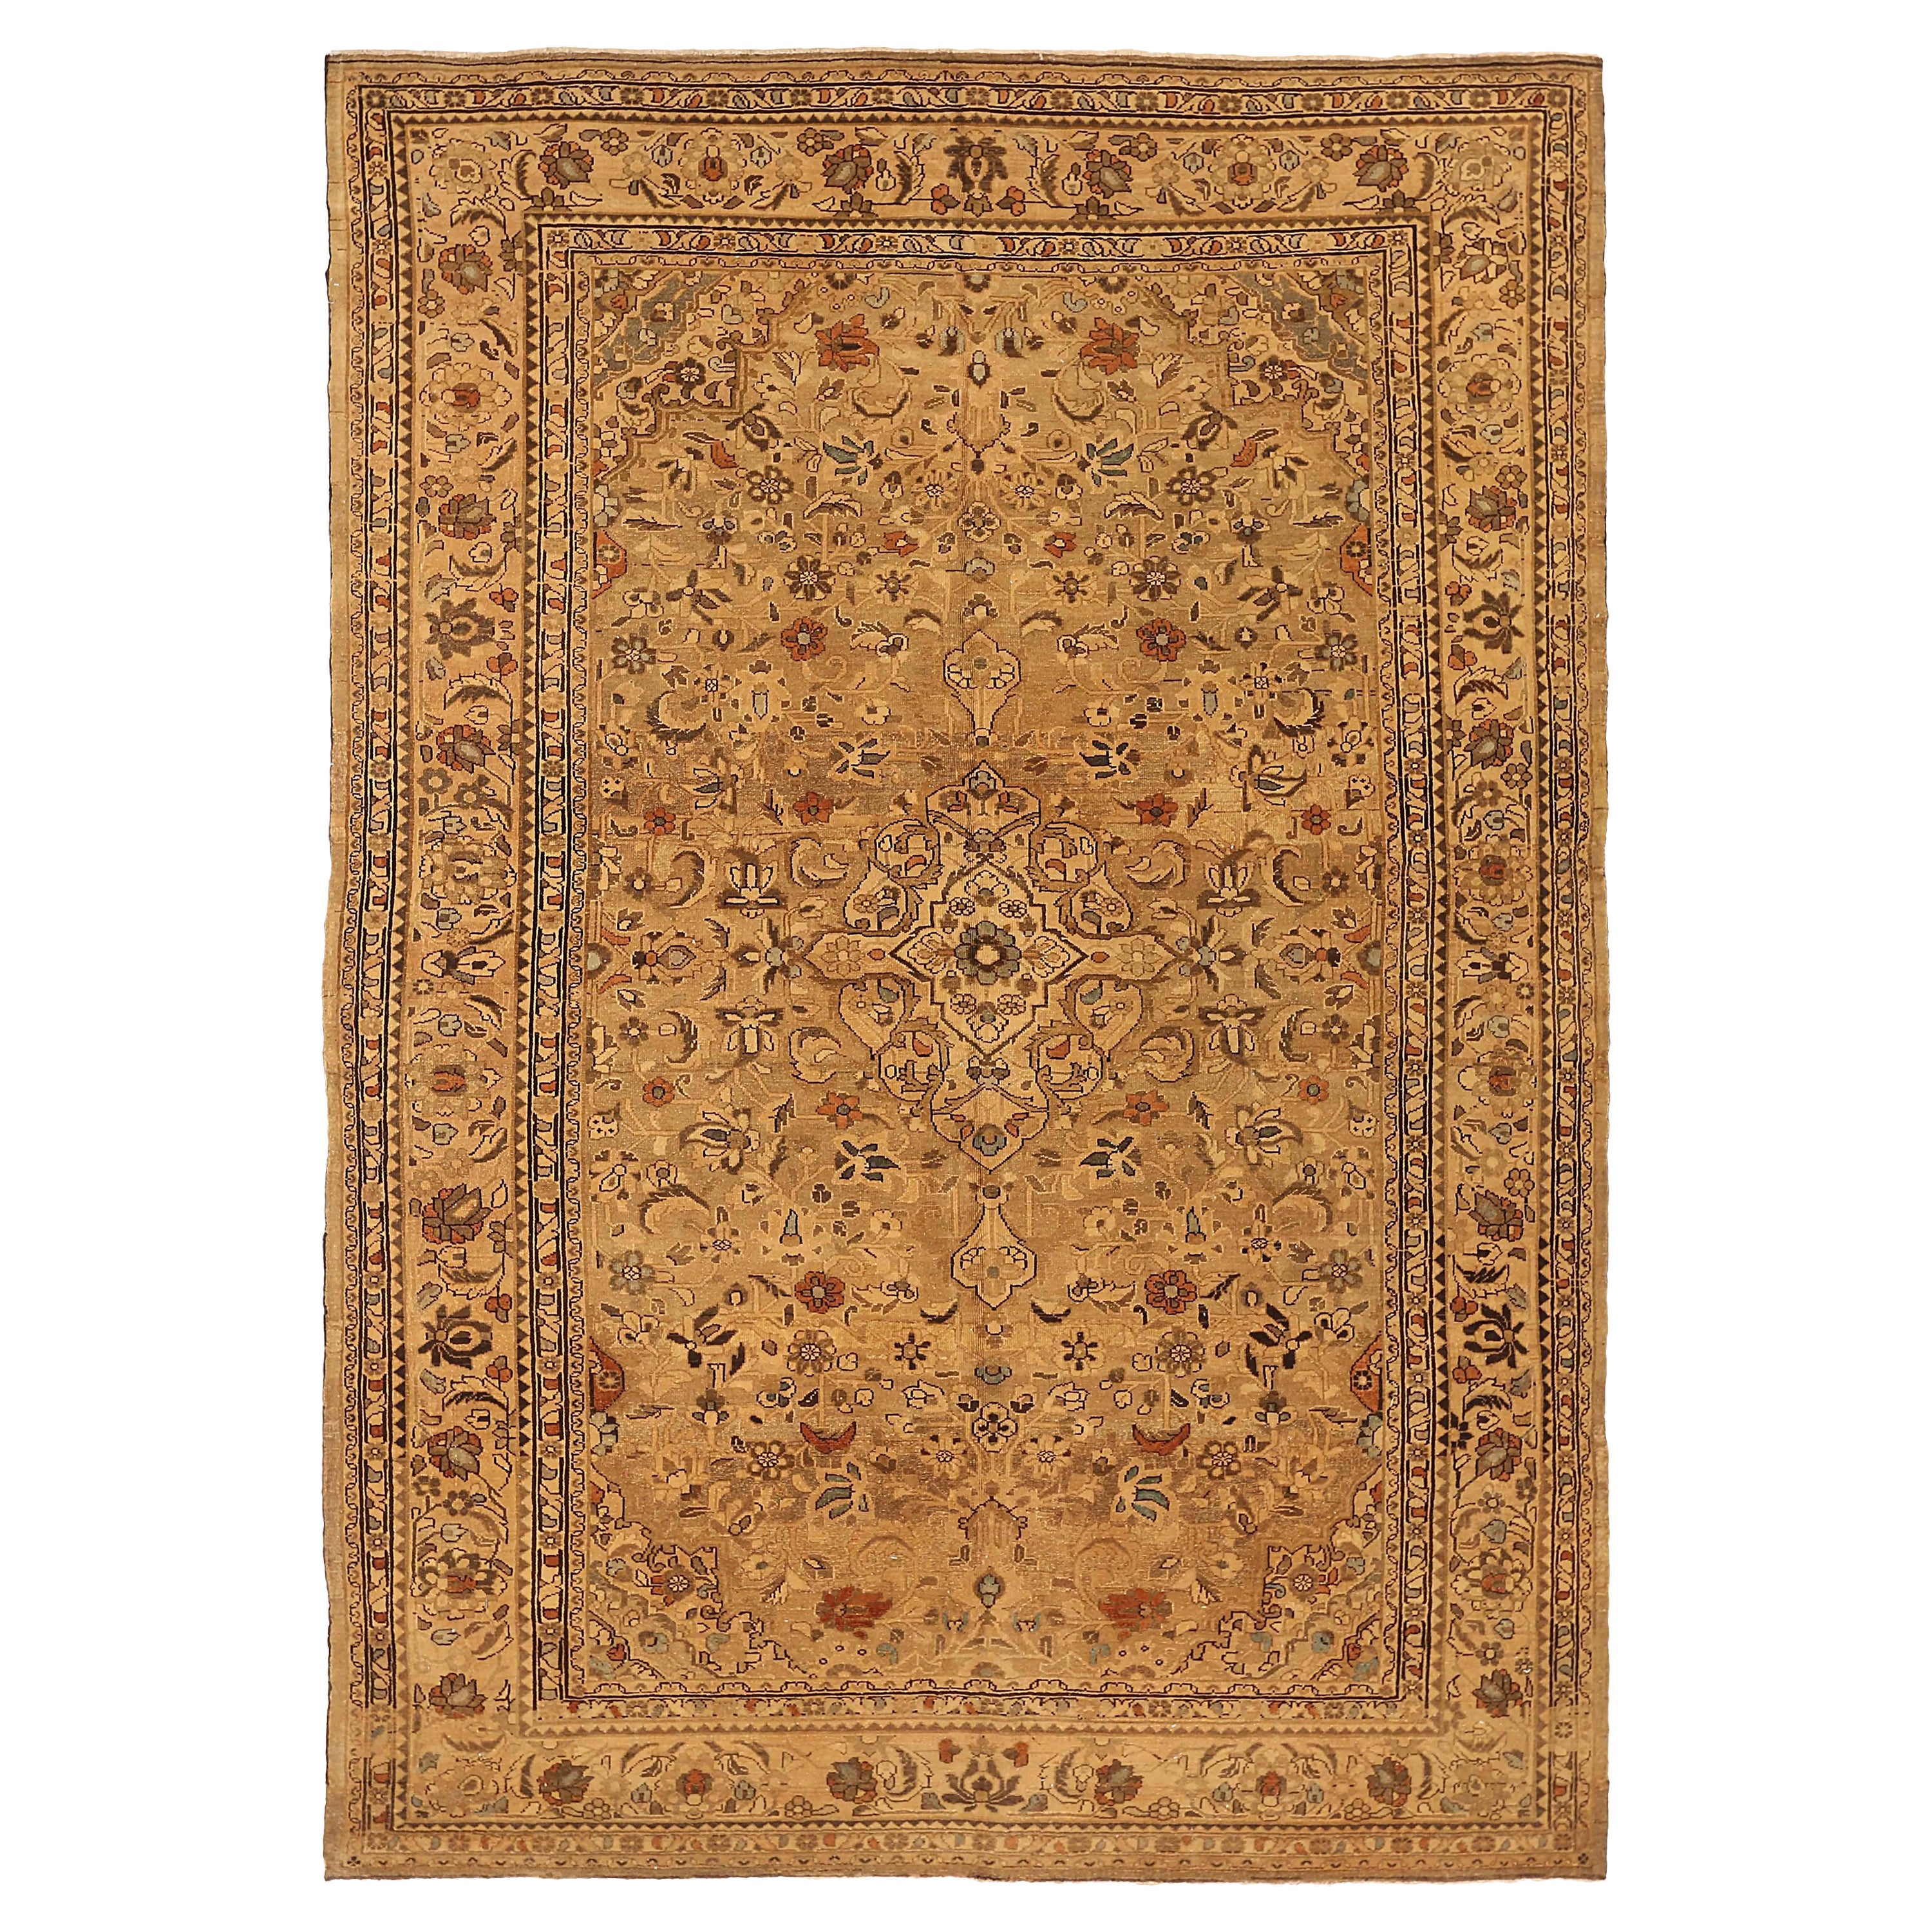 Hamedan Antique Persian Rug with Sub-Geometric Design in Blues and Neutrals  For Sale at 1stDibs